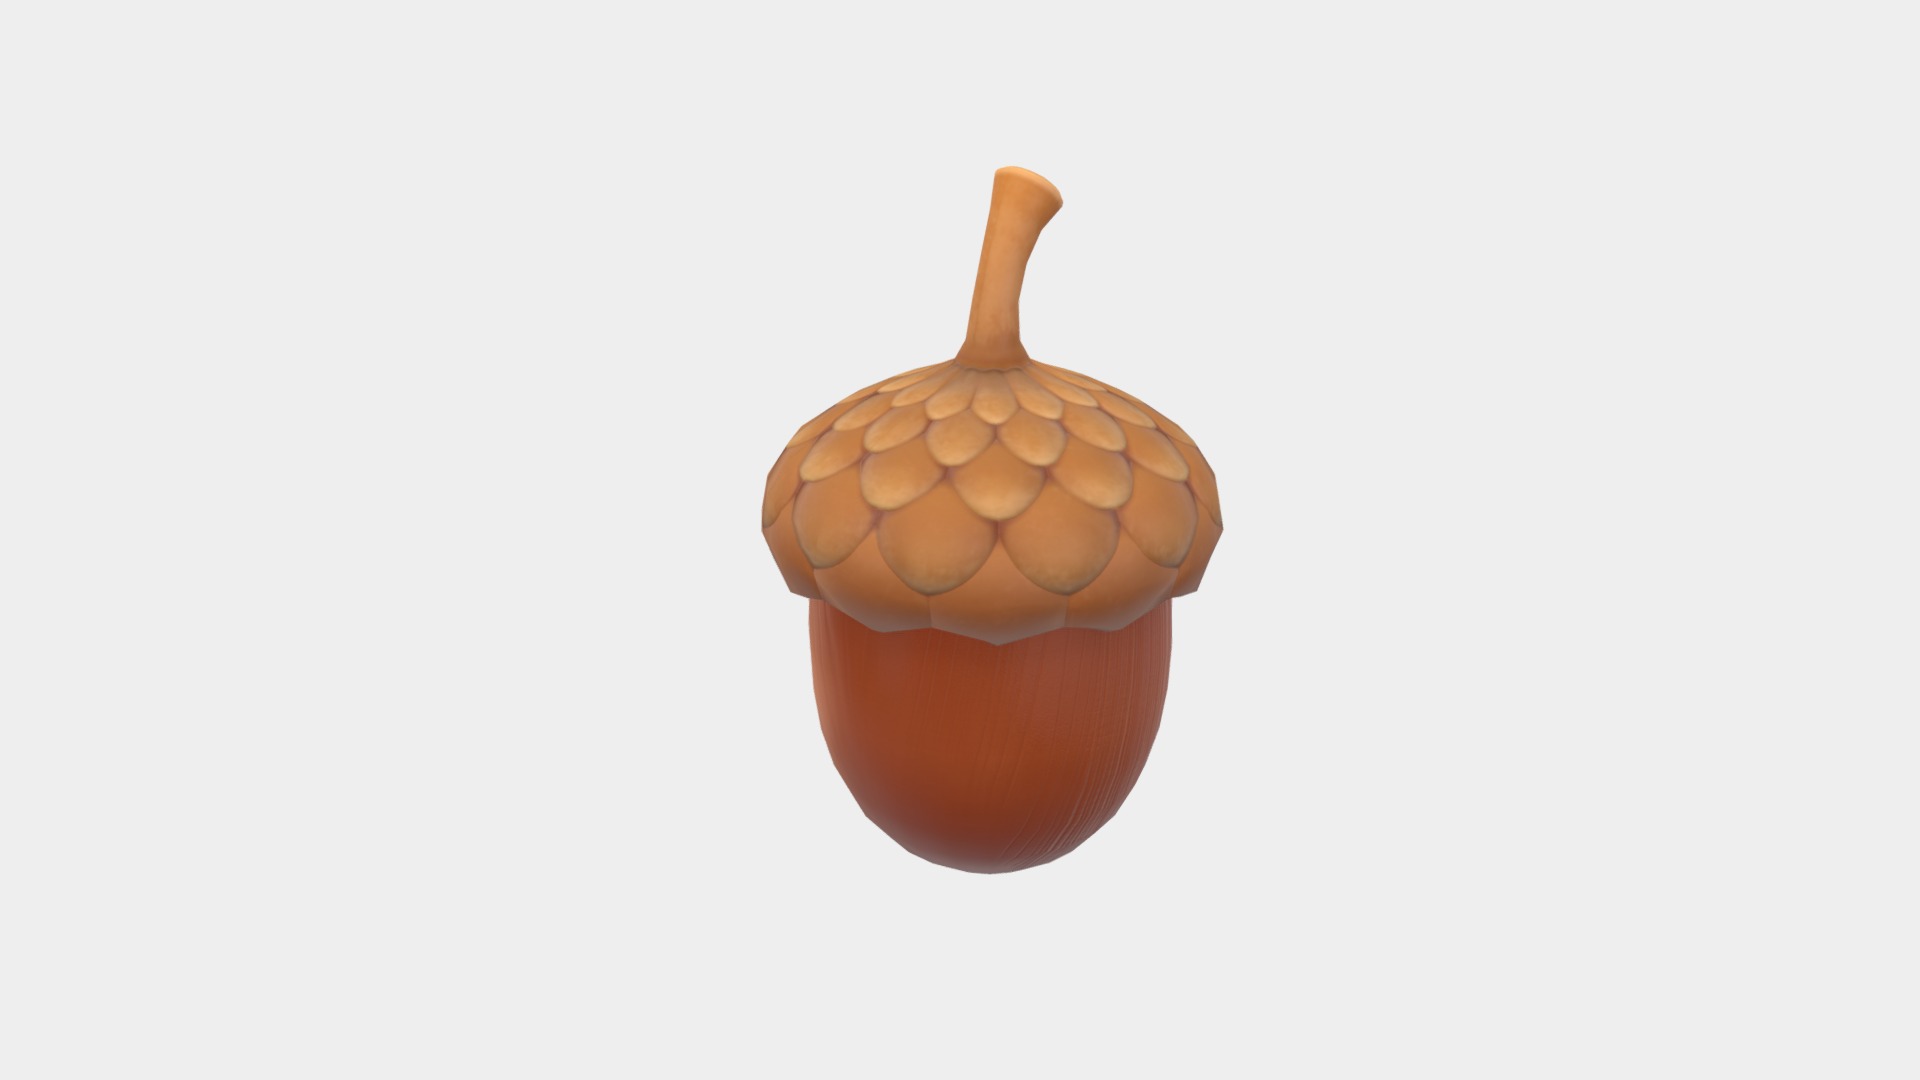 3D model Acorn - This is a 3D model of the Acorn. The 3D model is about a brown egg with a brown handle.